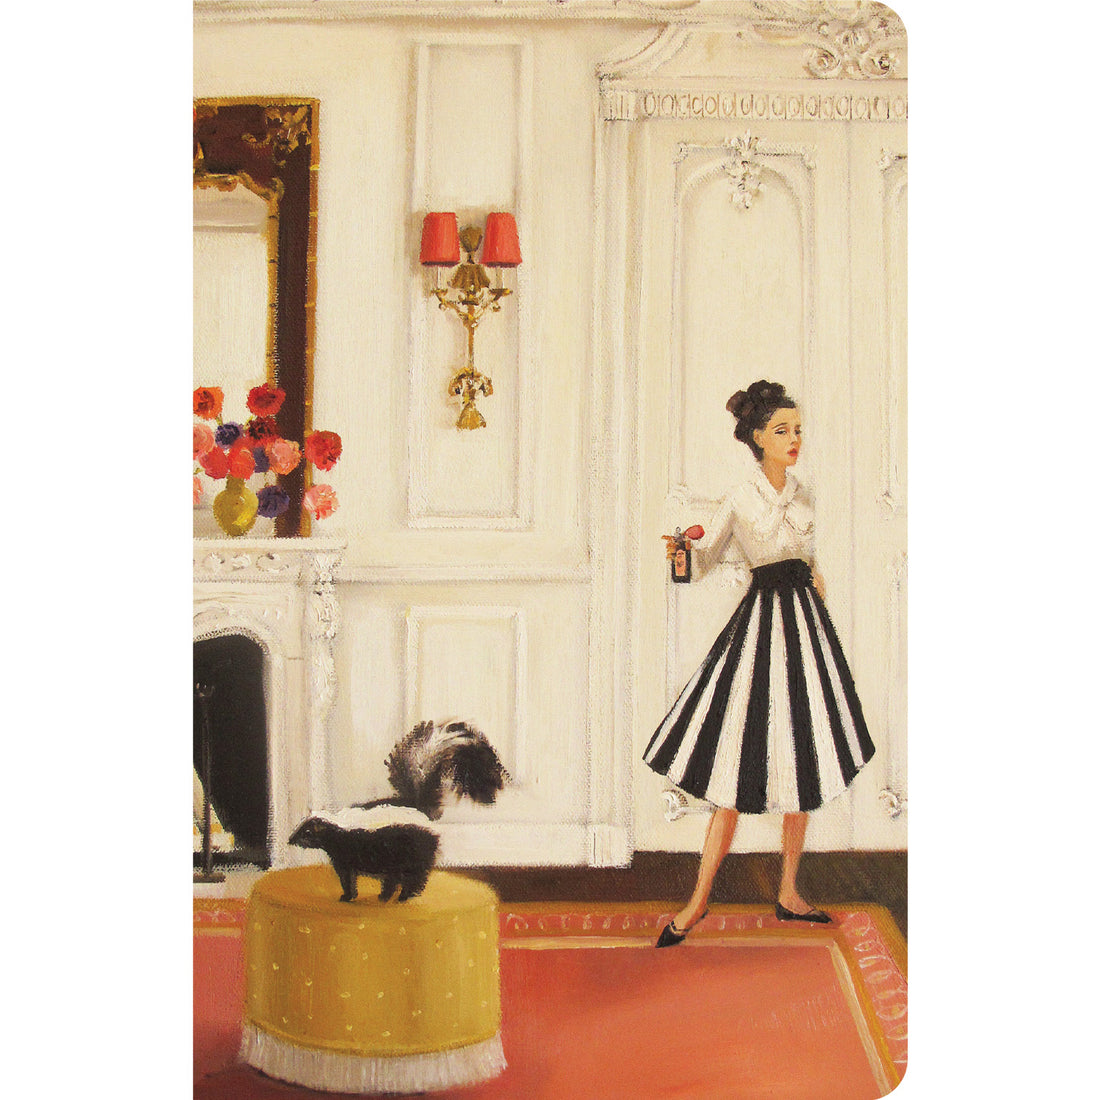 A painterly illustration of a luxurious interior space where a woman in a white blouse and black and white striped skirt is holding a bottle of perfume toward a skunk standing on a yellow ottoman with its tail raised.  